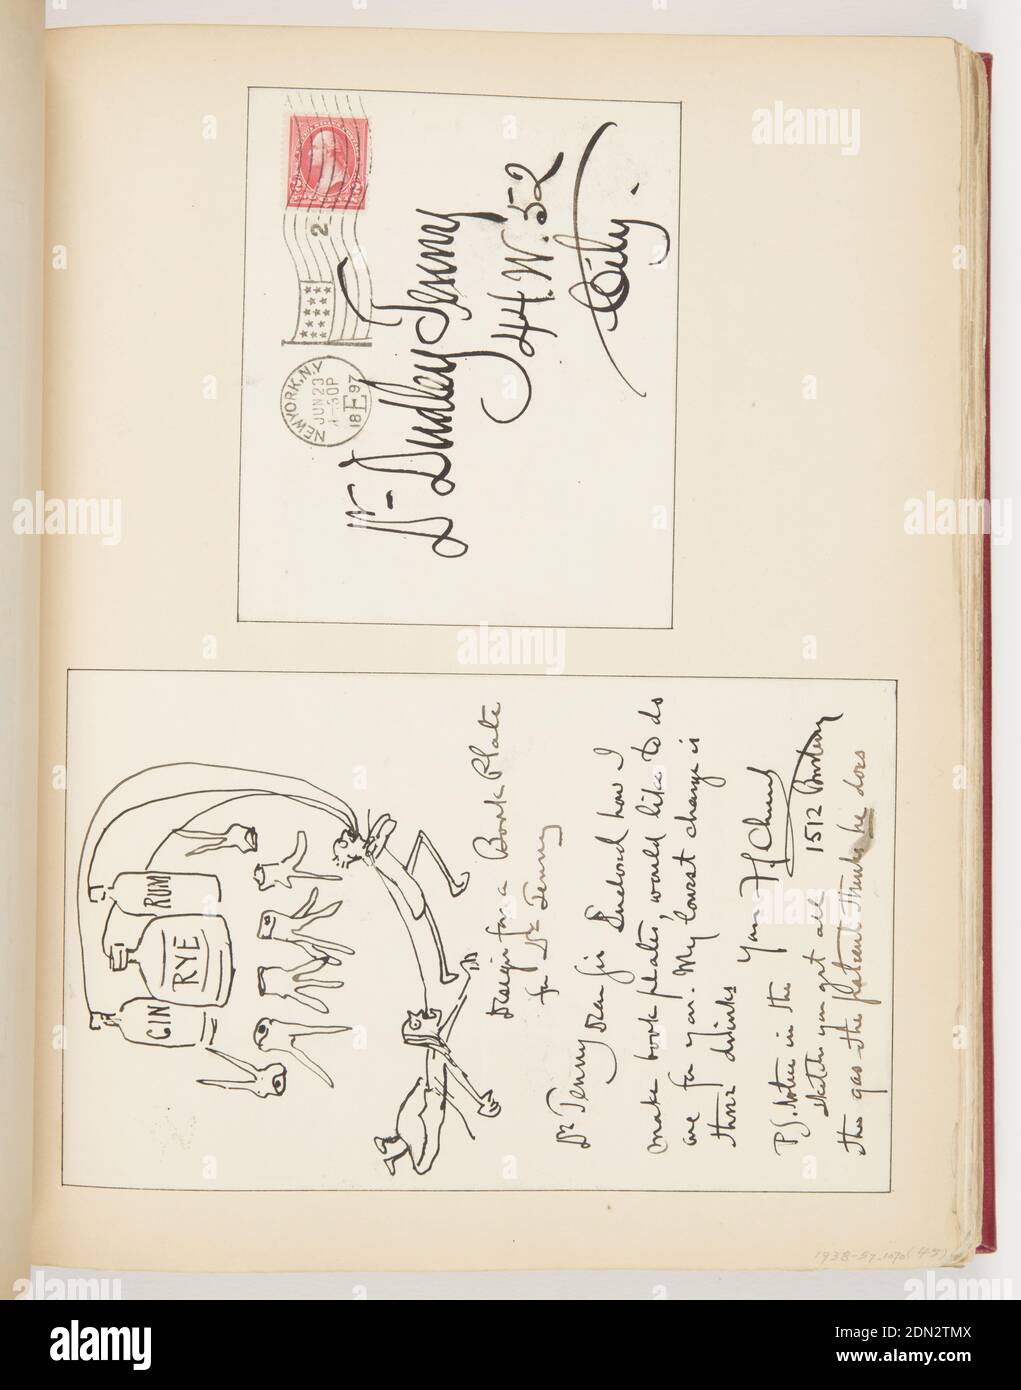 Letter to Dr. Dudley Tenney, Pen and black ink on paper, Top; front of envelope addressed to Dr. Dudley Tenney. Bottom; top, bottles of alcohol with labels, below various extracted teeth; center, left figure lays on ground, while right figure pulls a tooth attached to a string, right figure is drinking alcohol through straws. Below, letter., USA, 1897, ephemera, Ephemera, Ephemera Stock Photo